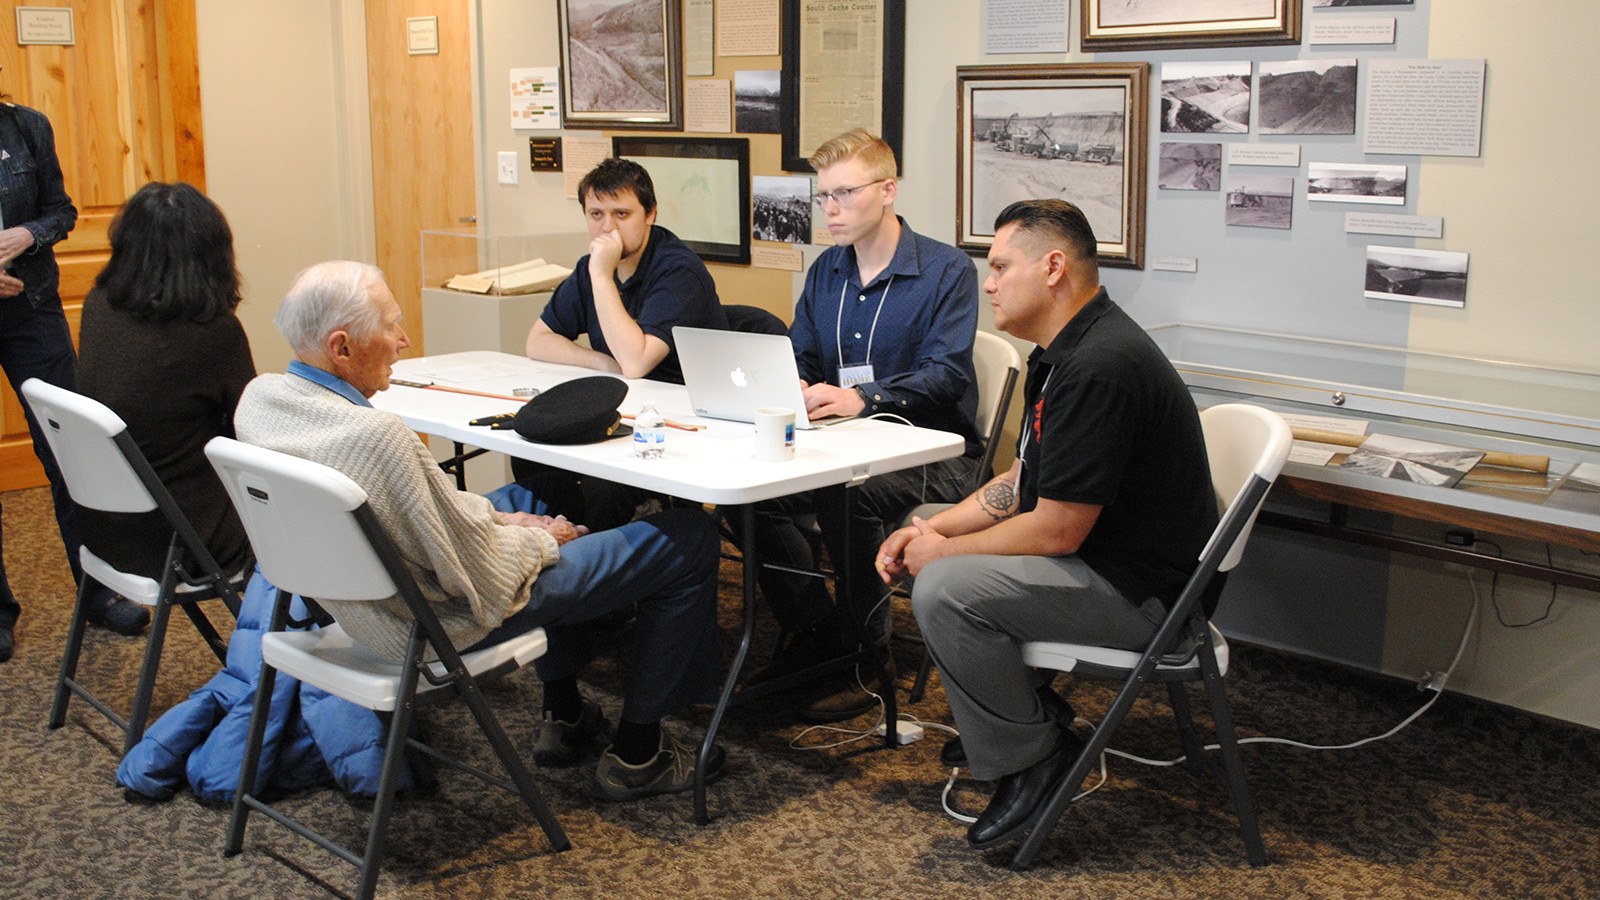 World War II Veteran sits down with students from Utah State University to discuss artifacts